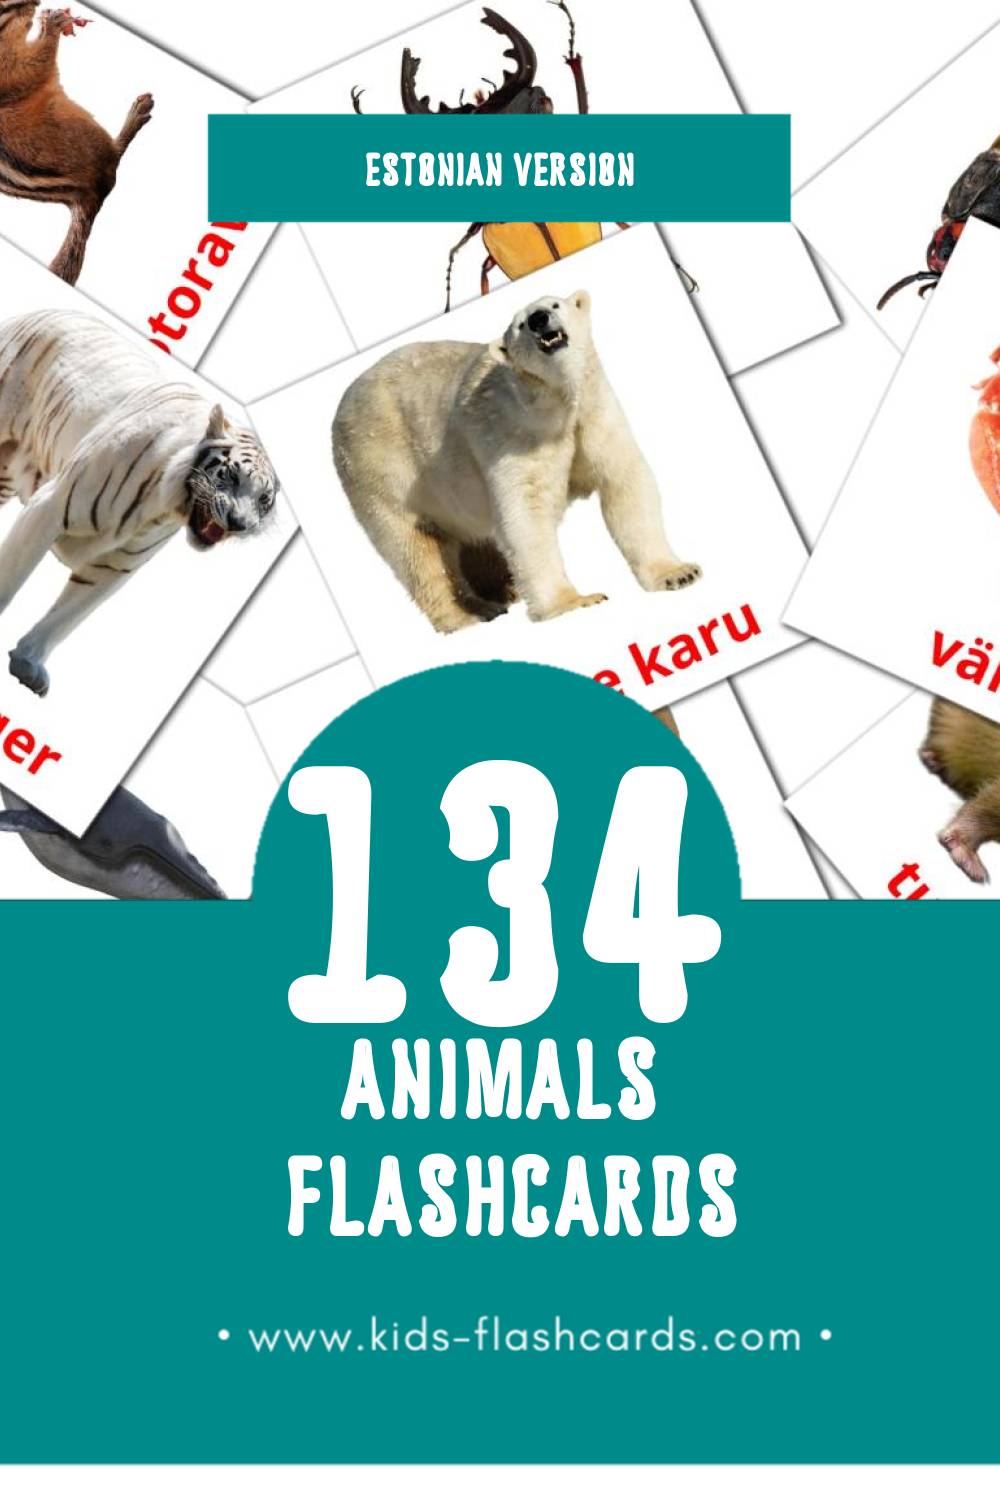 Visual LOOMAD Flashcards for Toddlers (134 cards in Estonian)